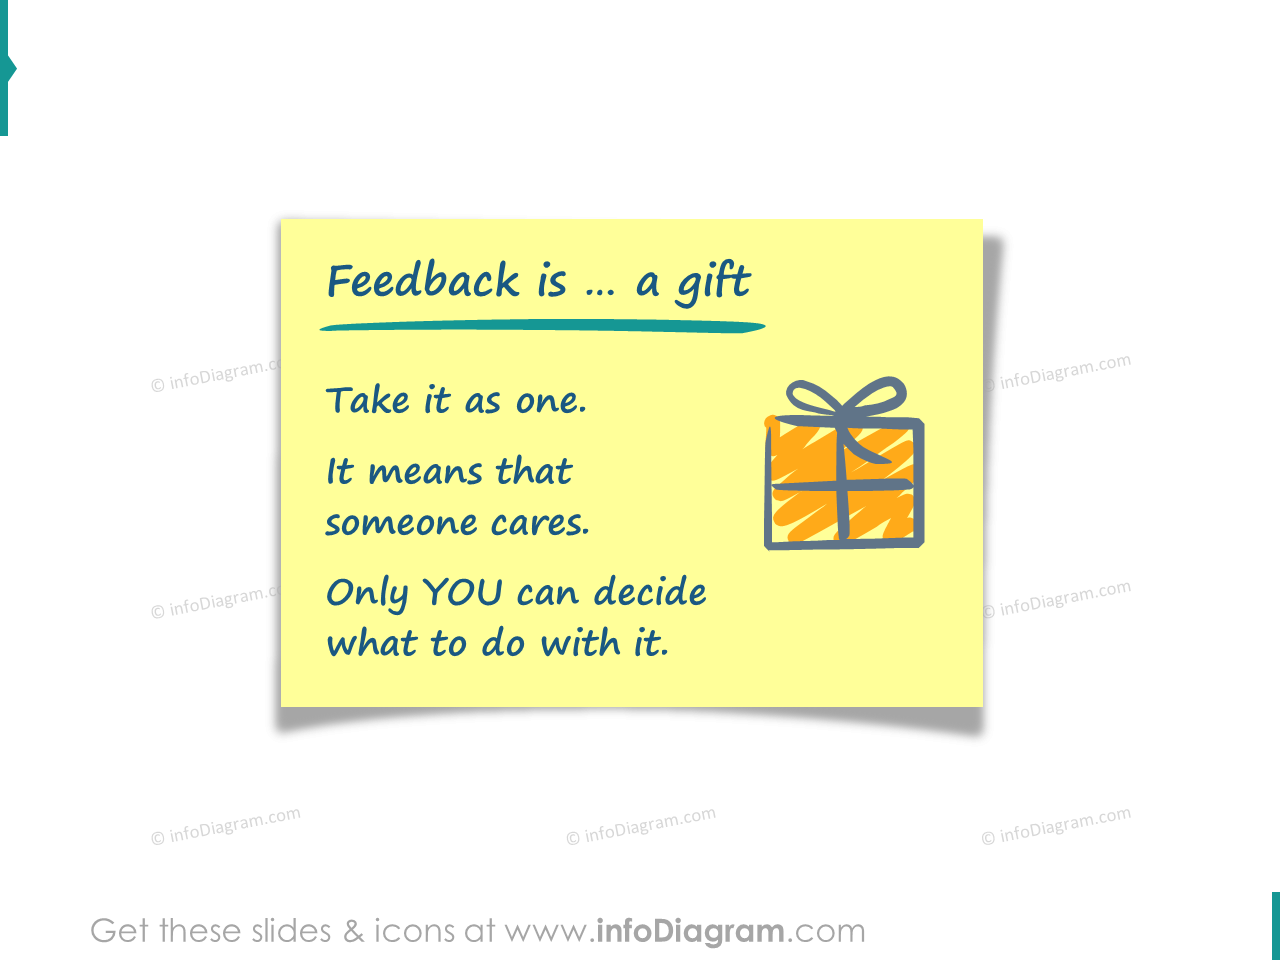 Where's the Gift? How to Use the Gift of Feedback | Go Neuro